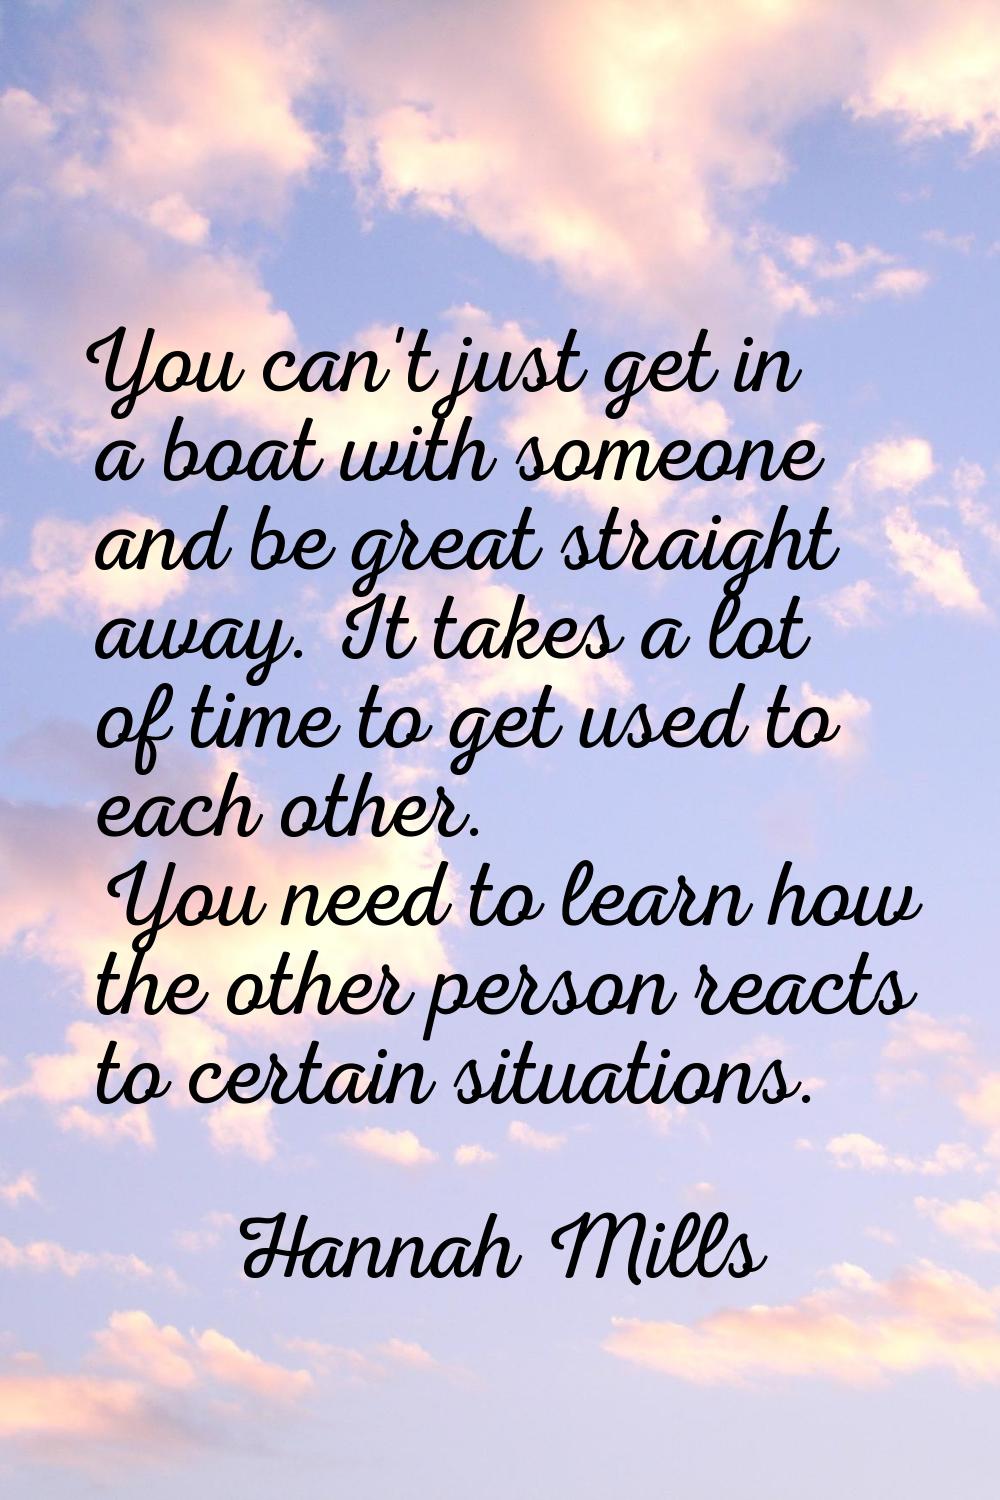 You can't just get in a boat with someone and be great straight away. It takes a lot of time to get